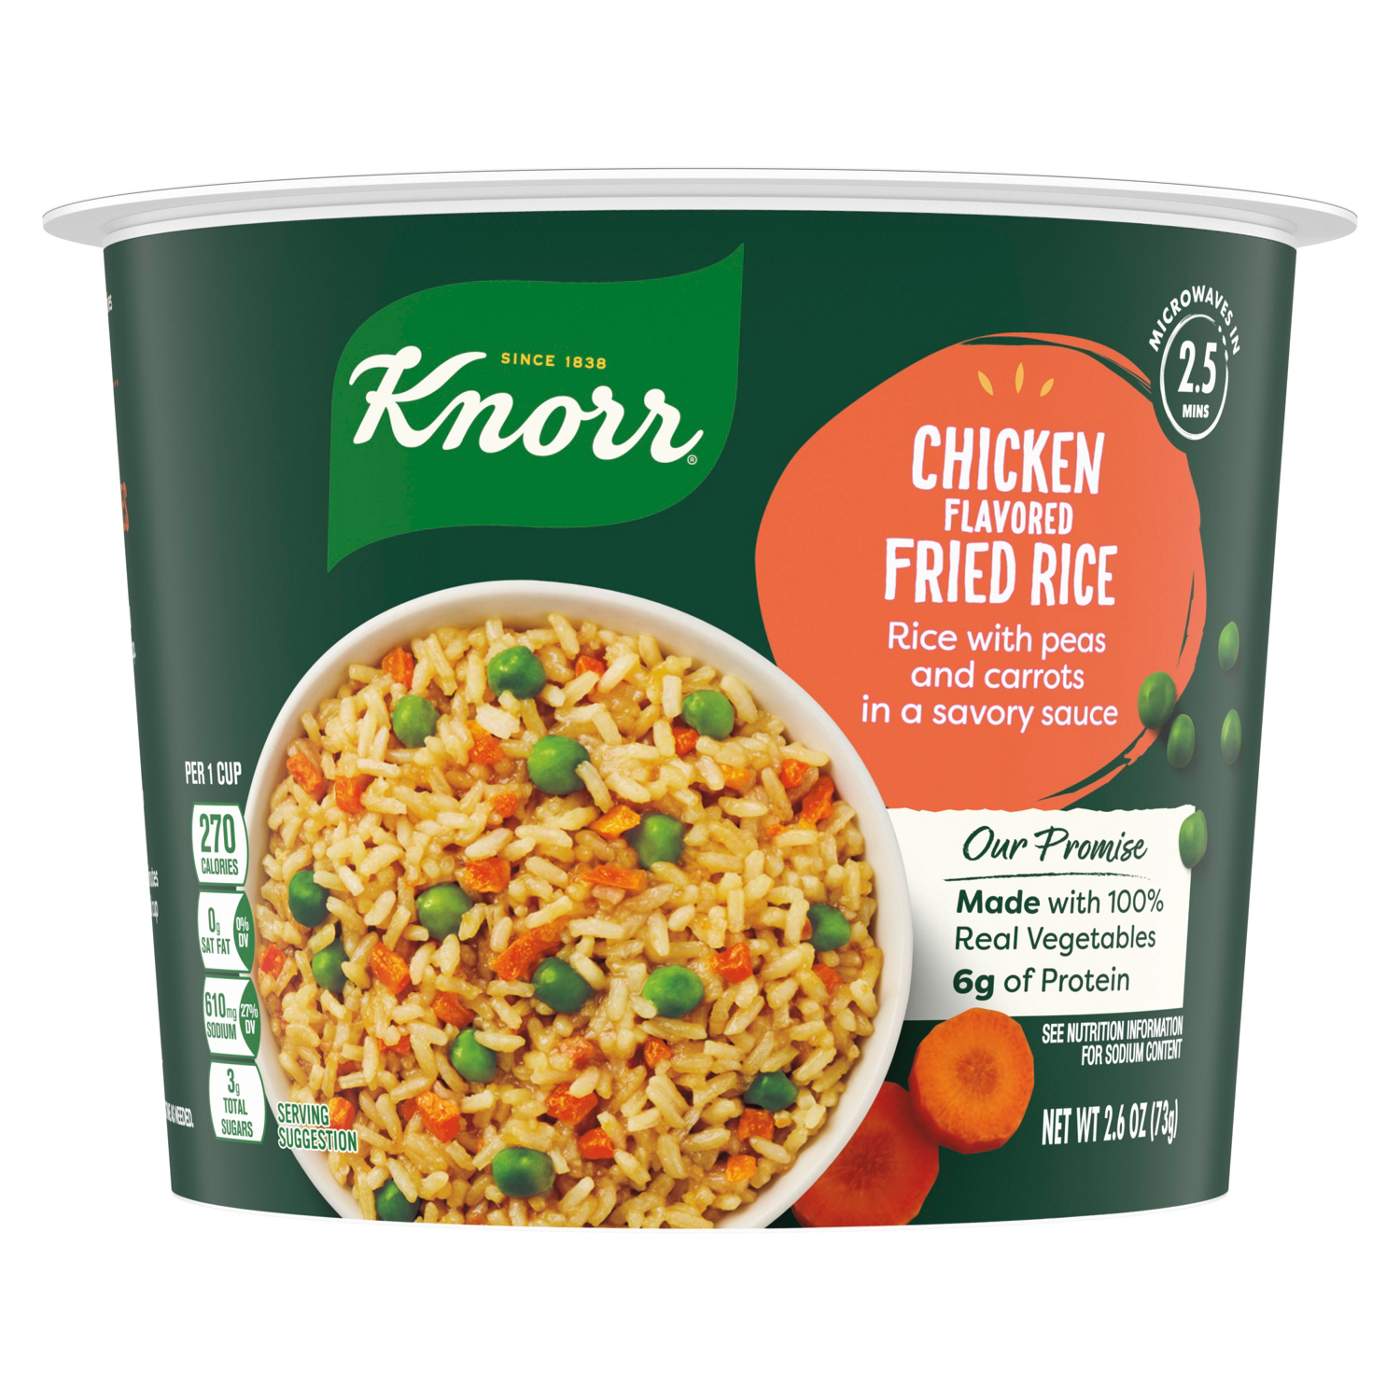 Knorr Chicken Fried Rice Cup; image 1 of 6